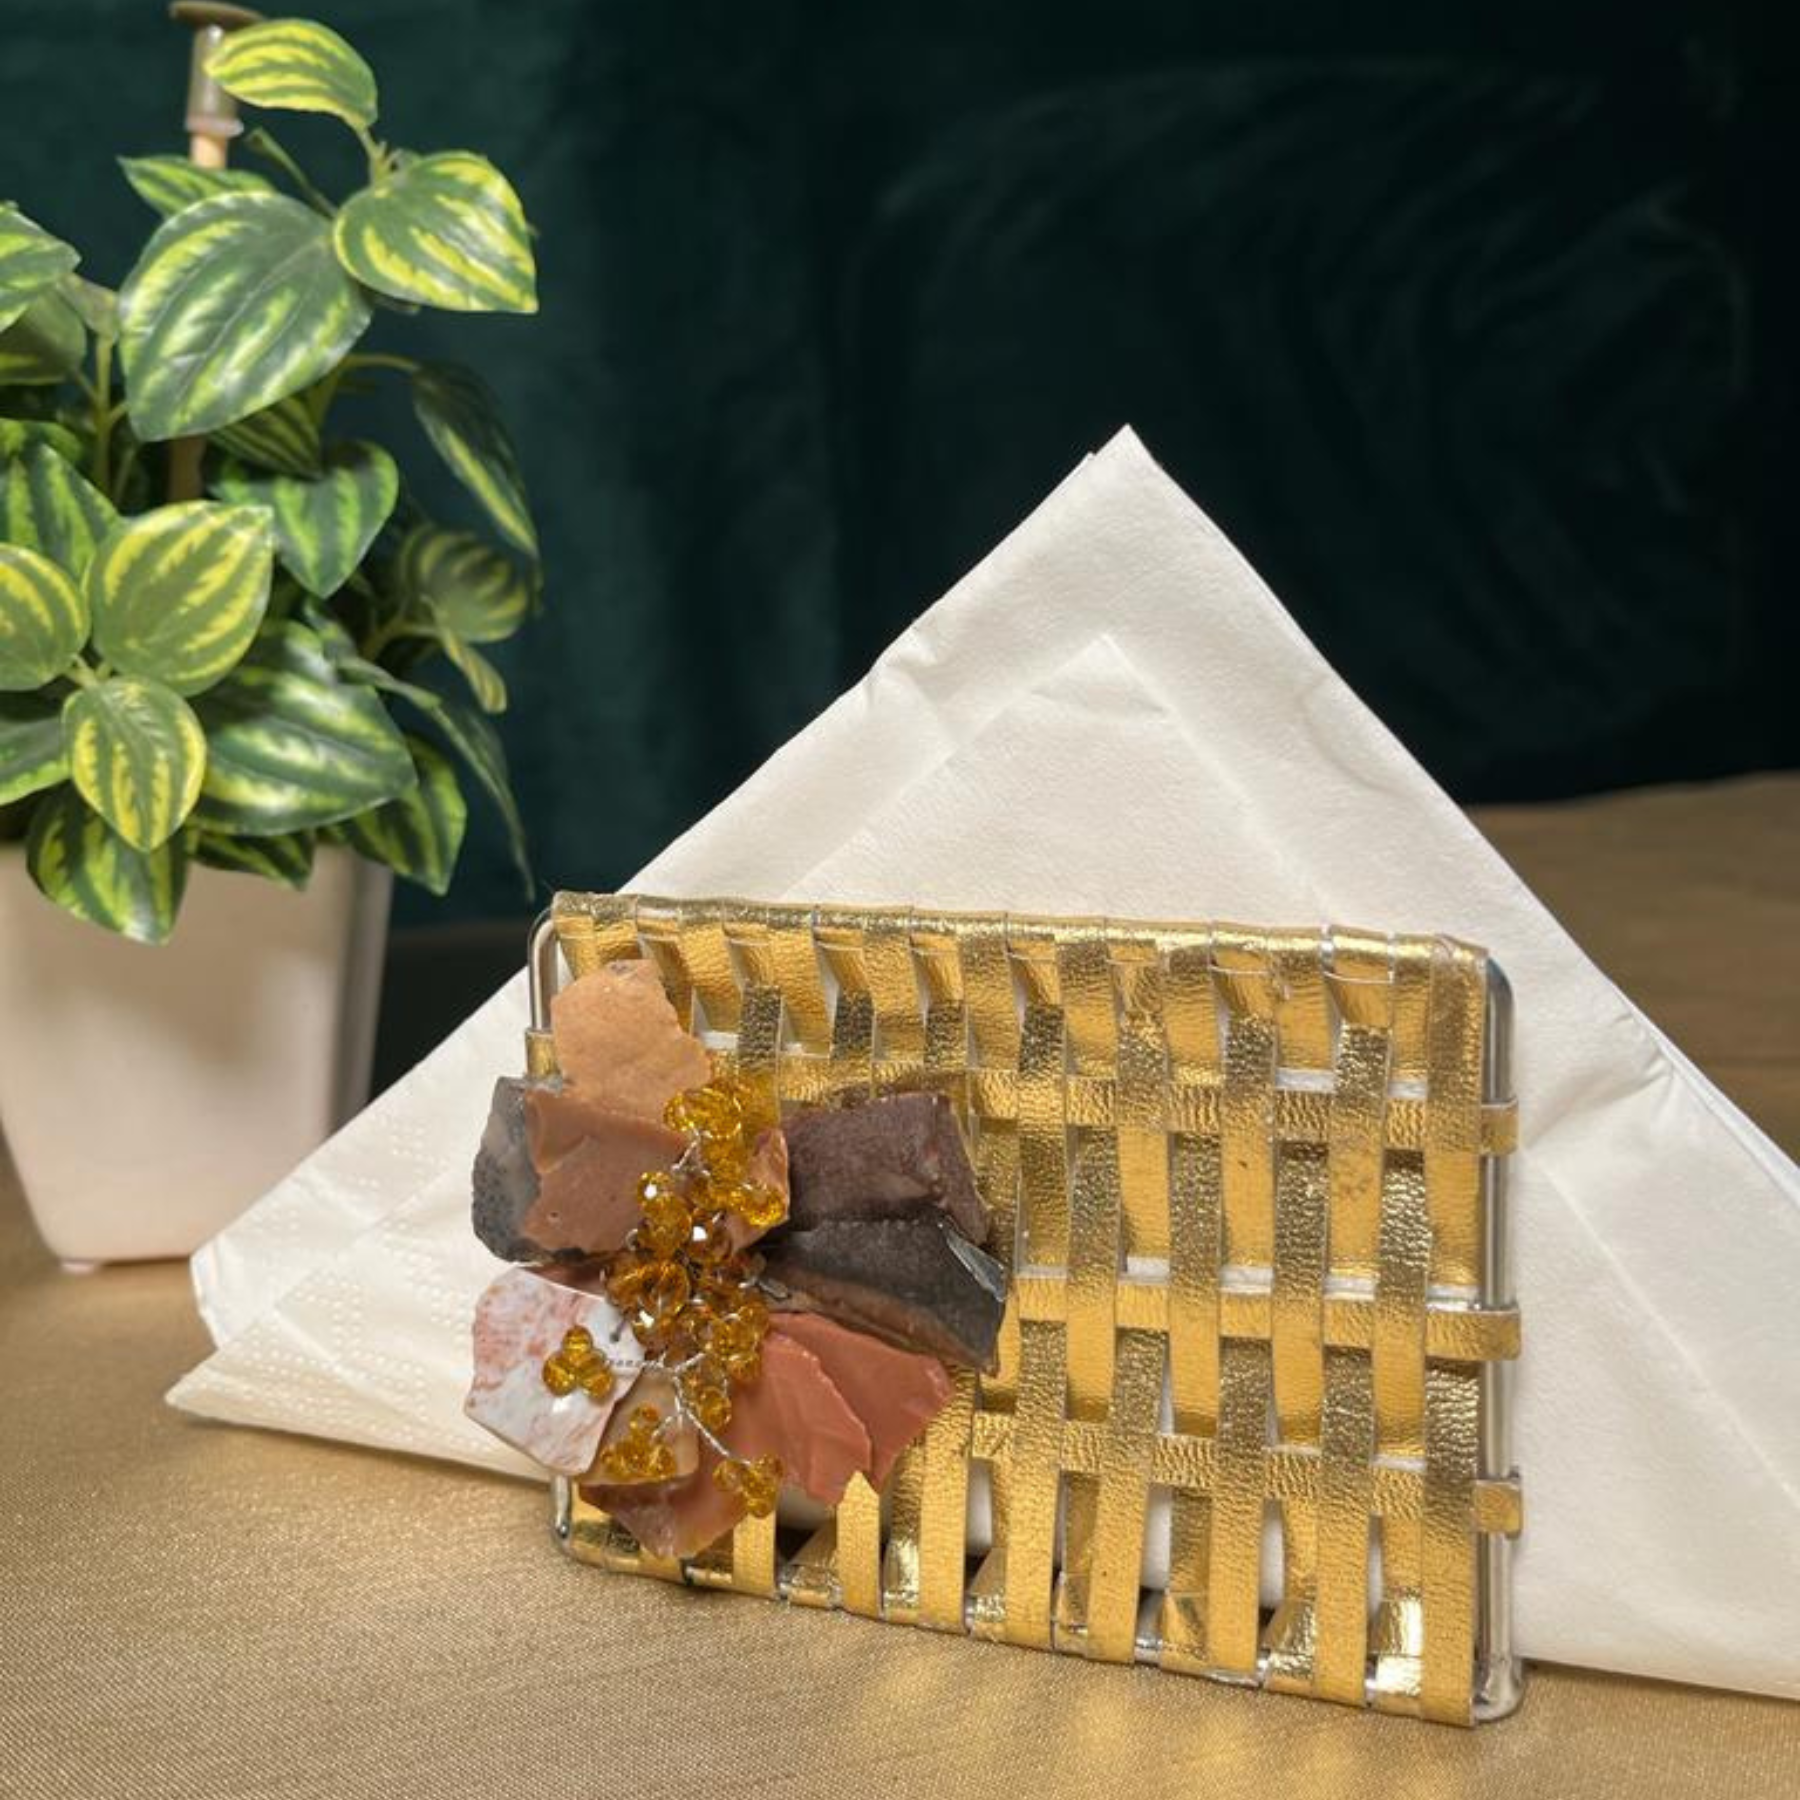 The LuxeLife Golden Tissue Holder with Flower at the front